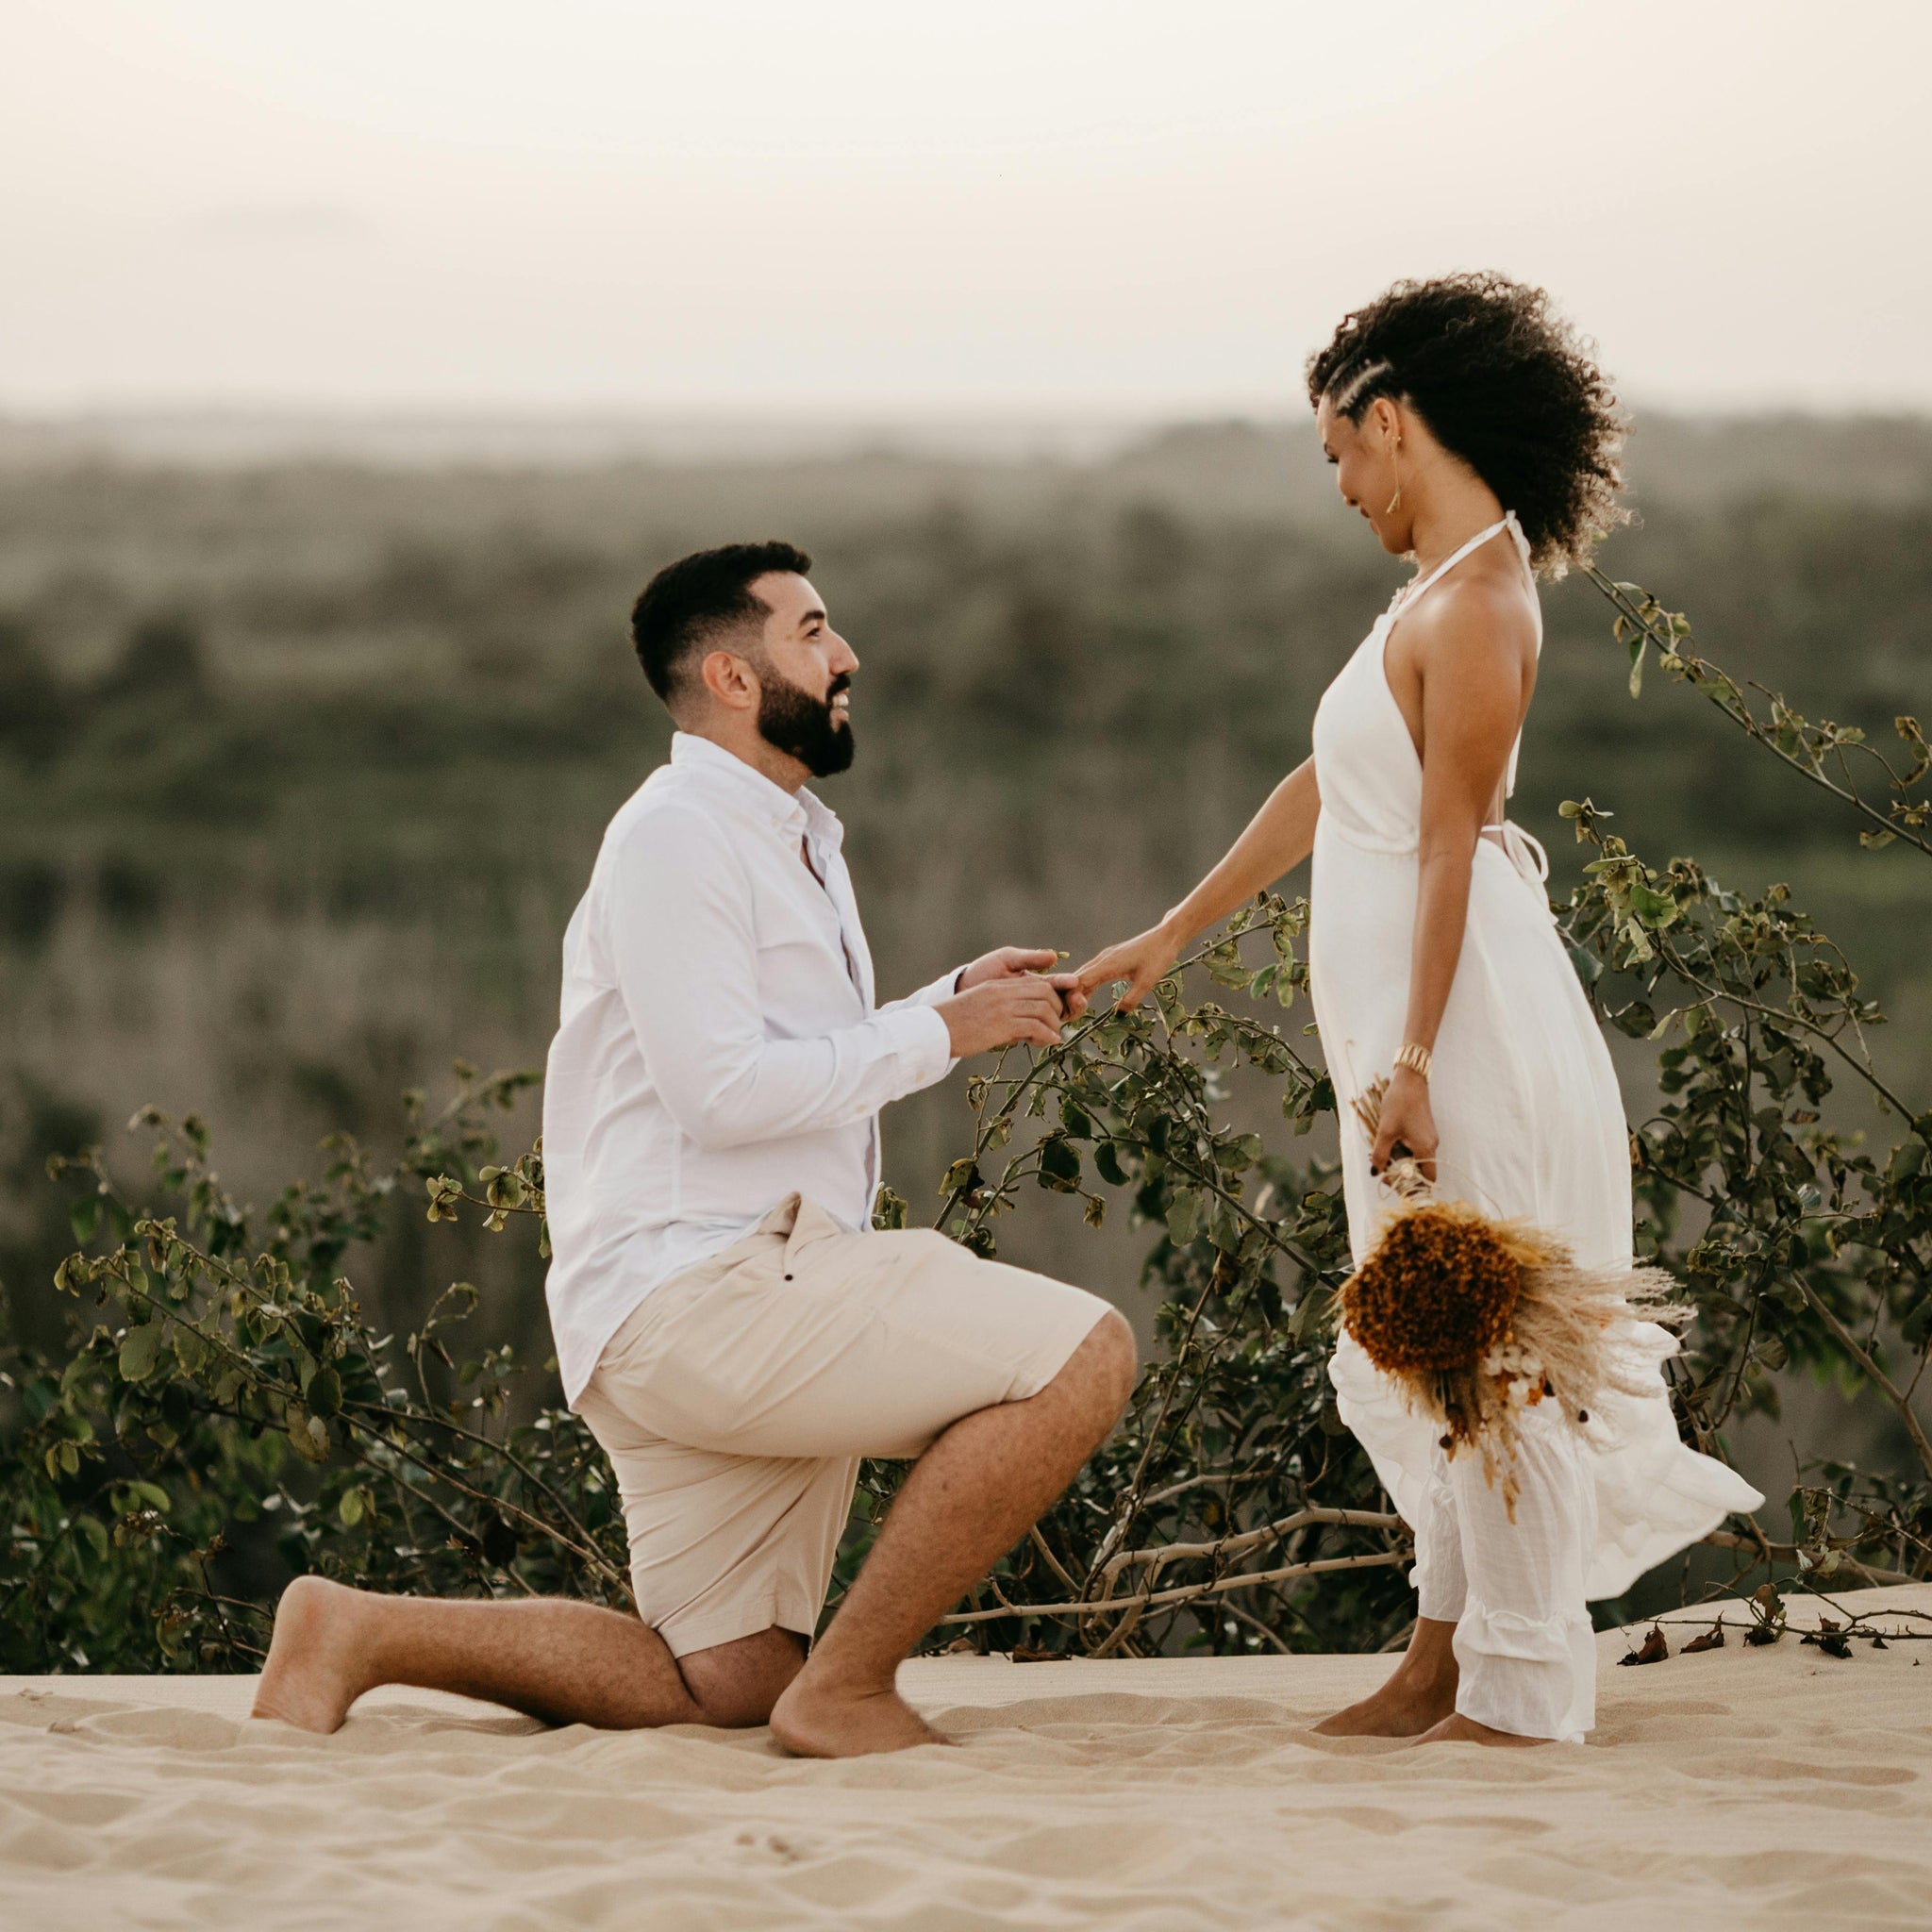 Are you thinking about popping the question? Here's What You Need to Know Before Proposing